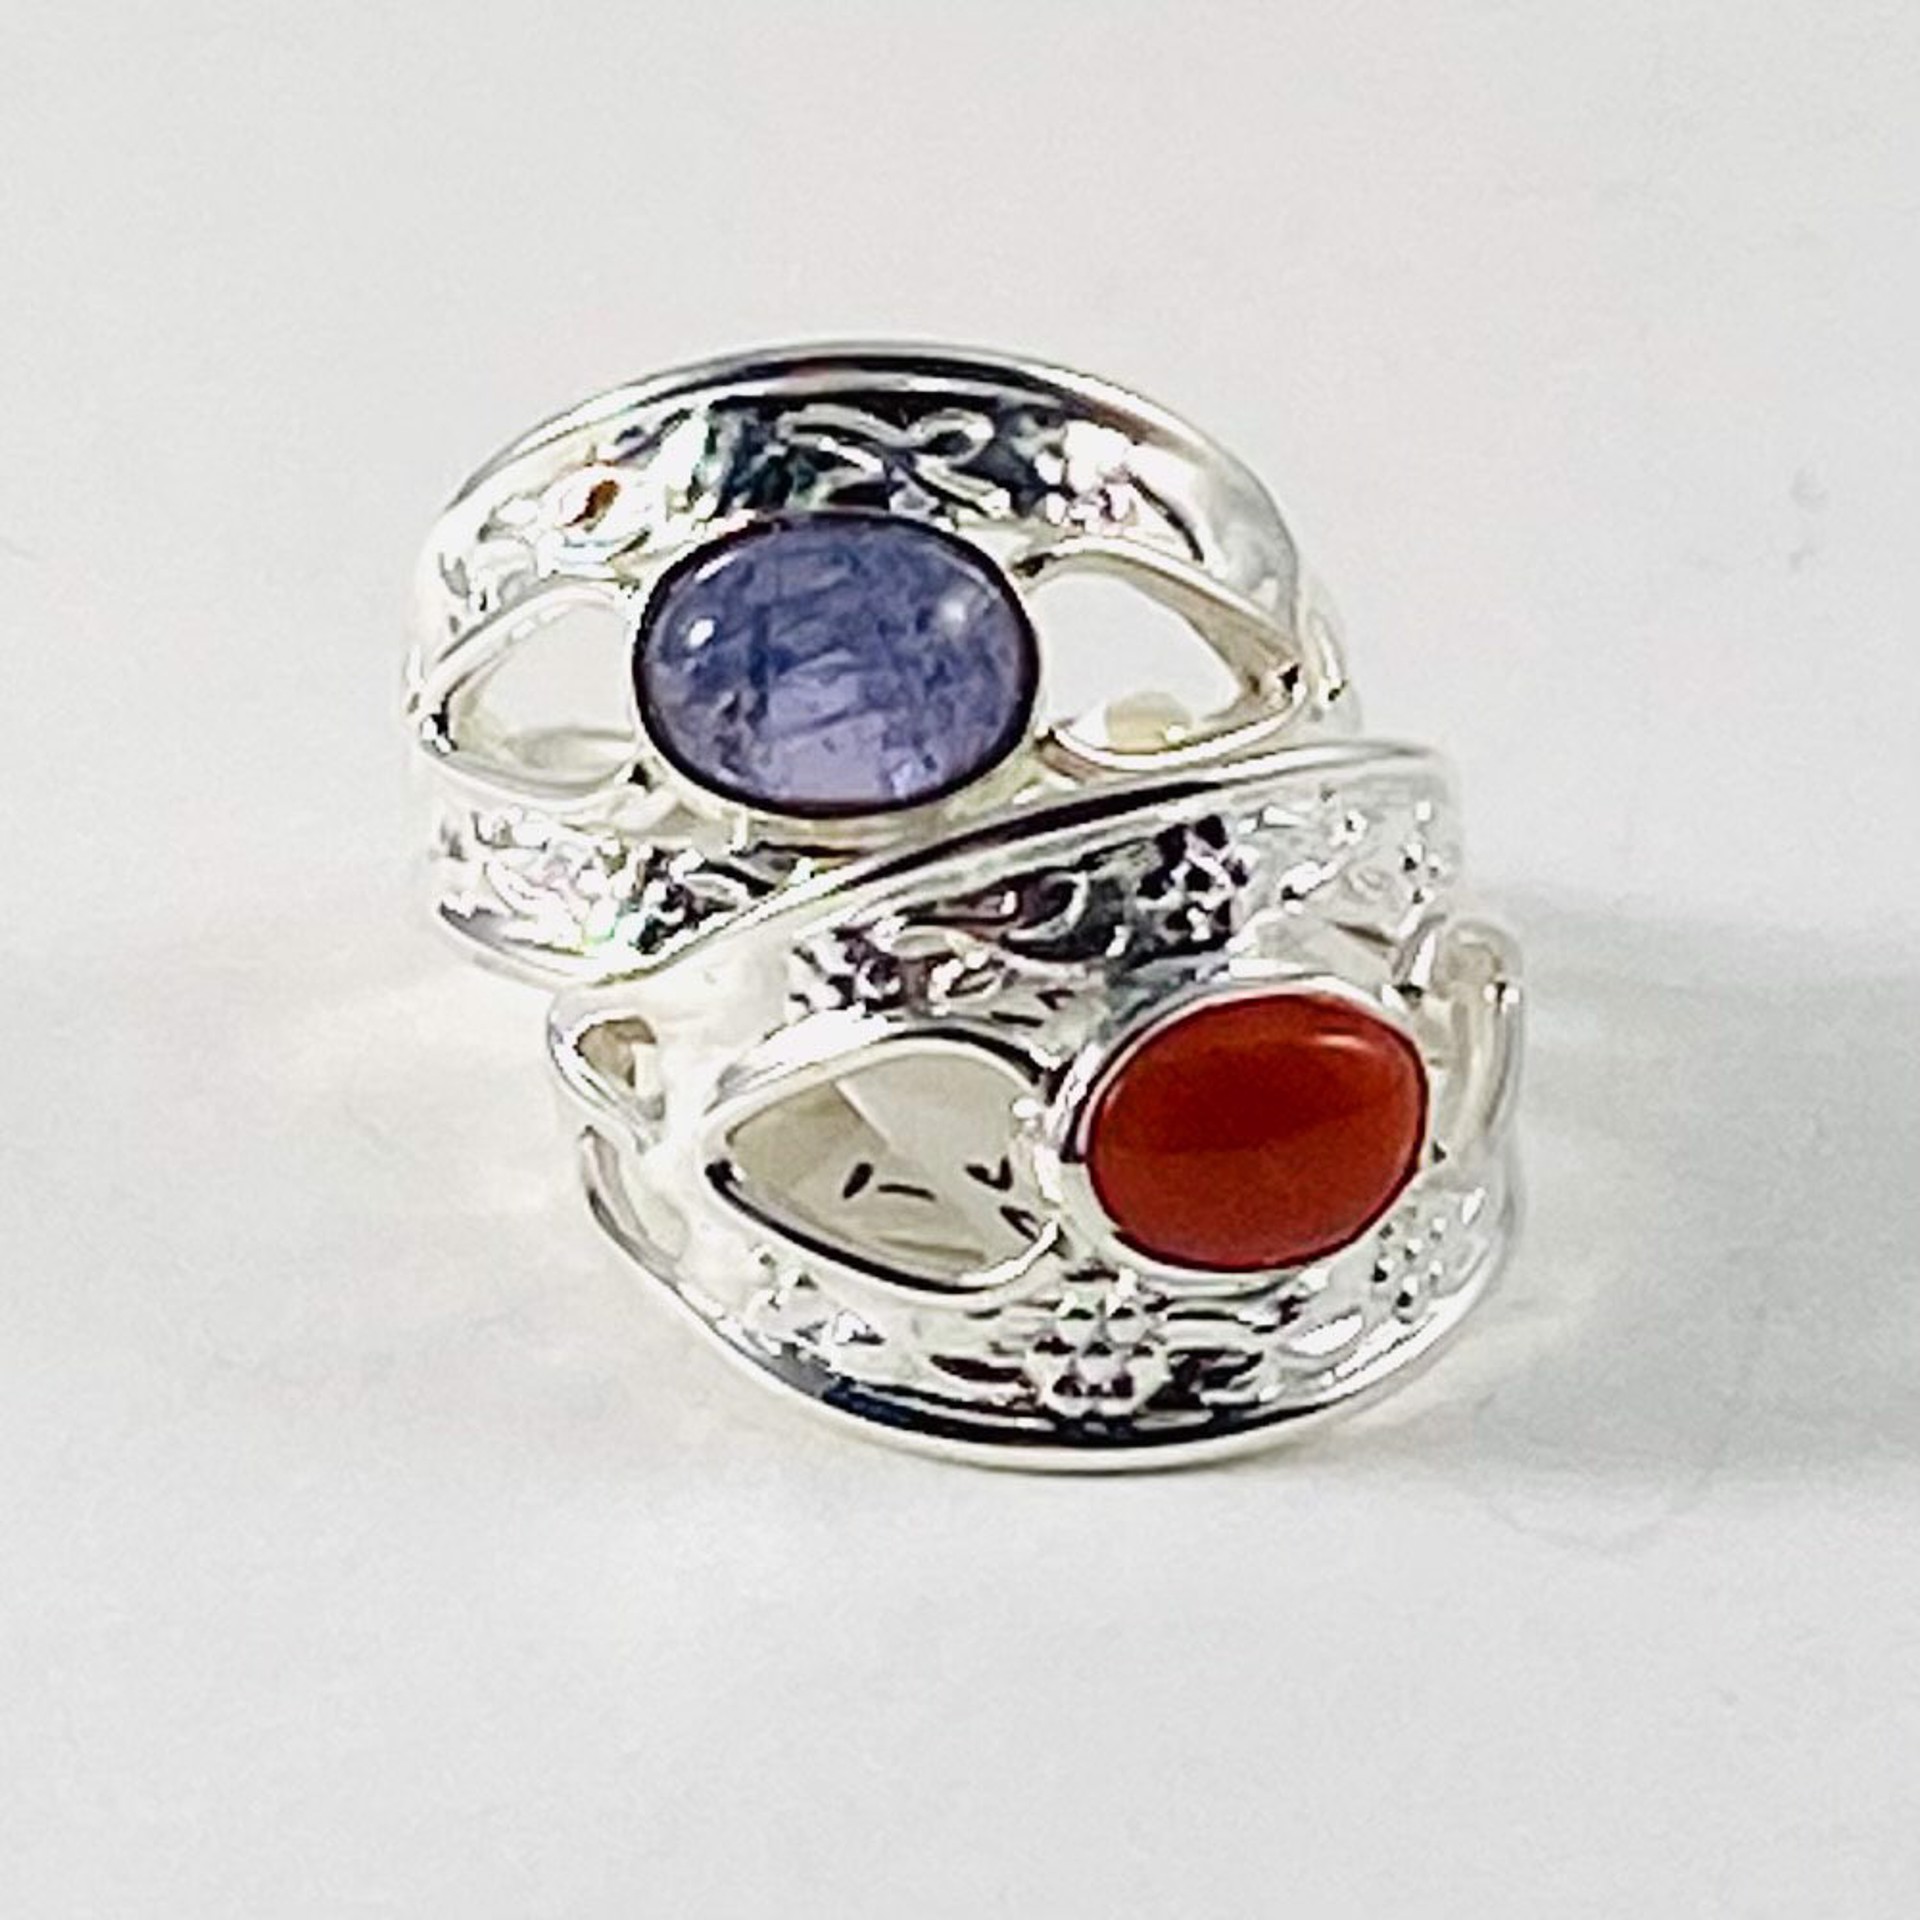 MON SR 3242 Tanzanite, Coral Ring LIMITED SIZES by Monica Mehta